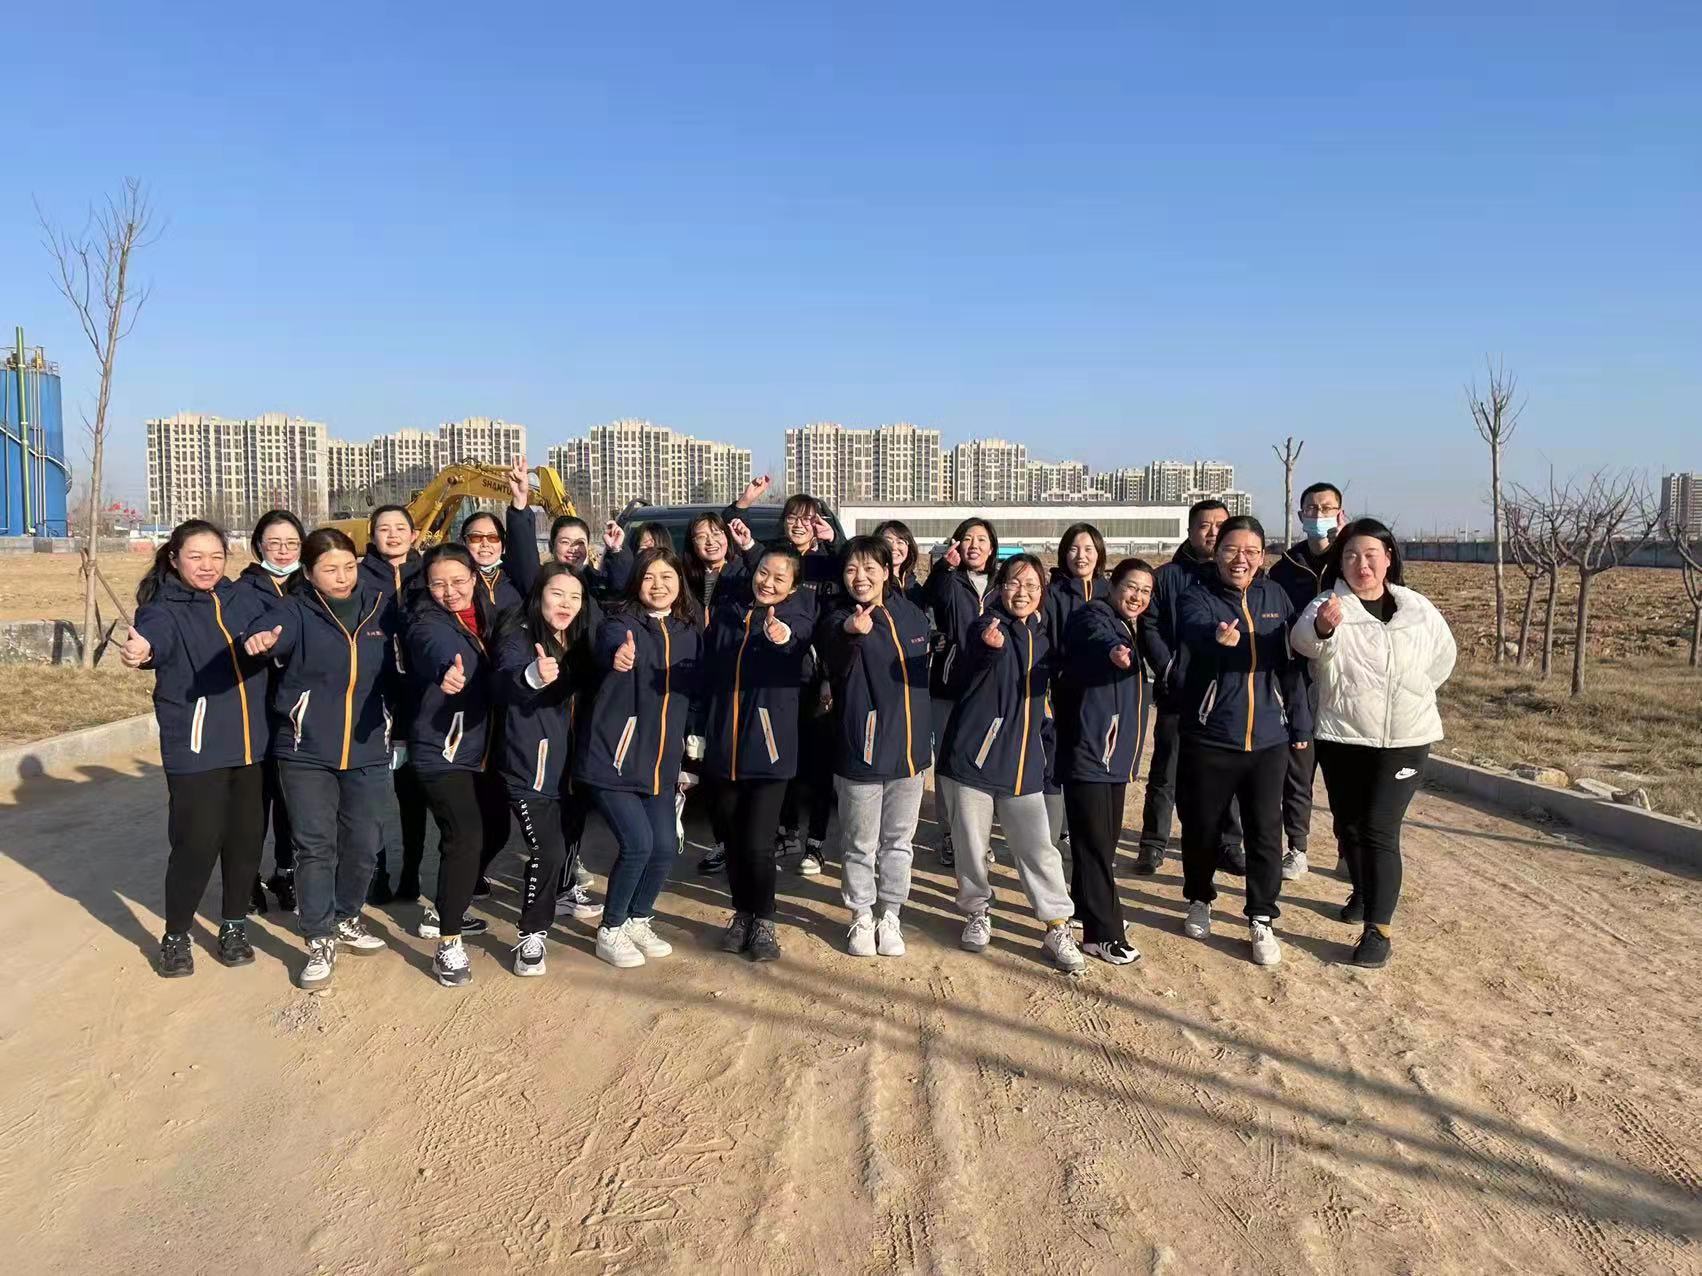 The company organized outdoor hiking activities for employees